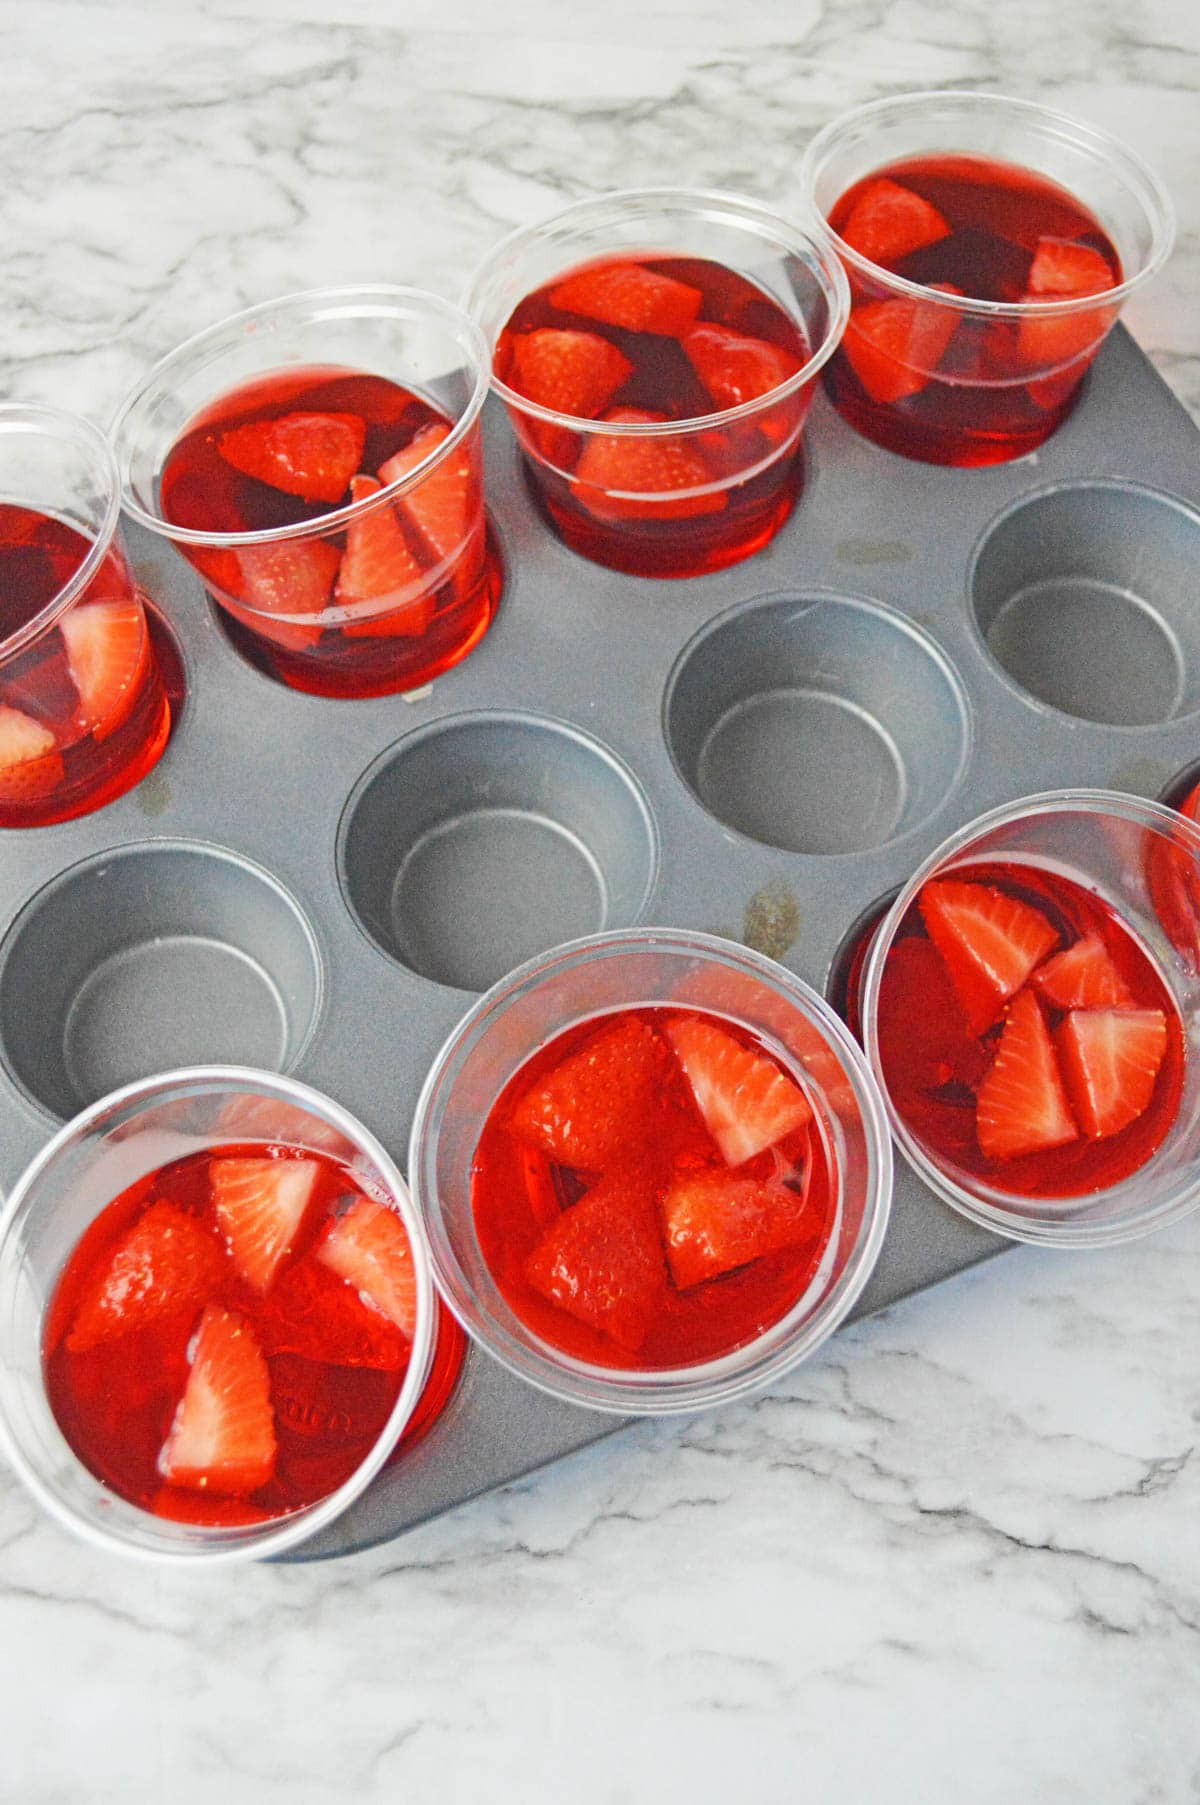 Jello with strawberries added